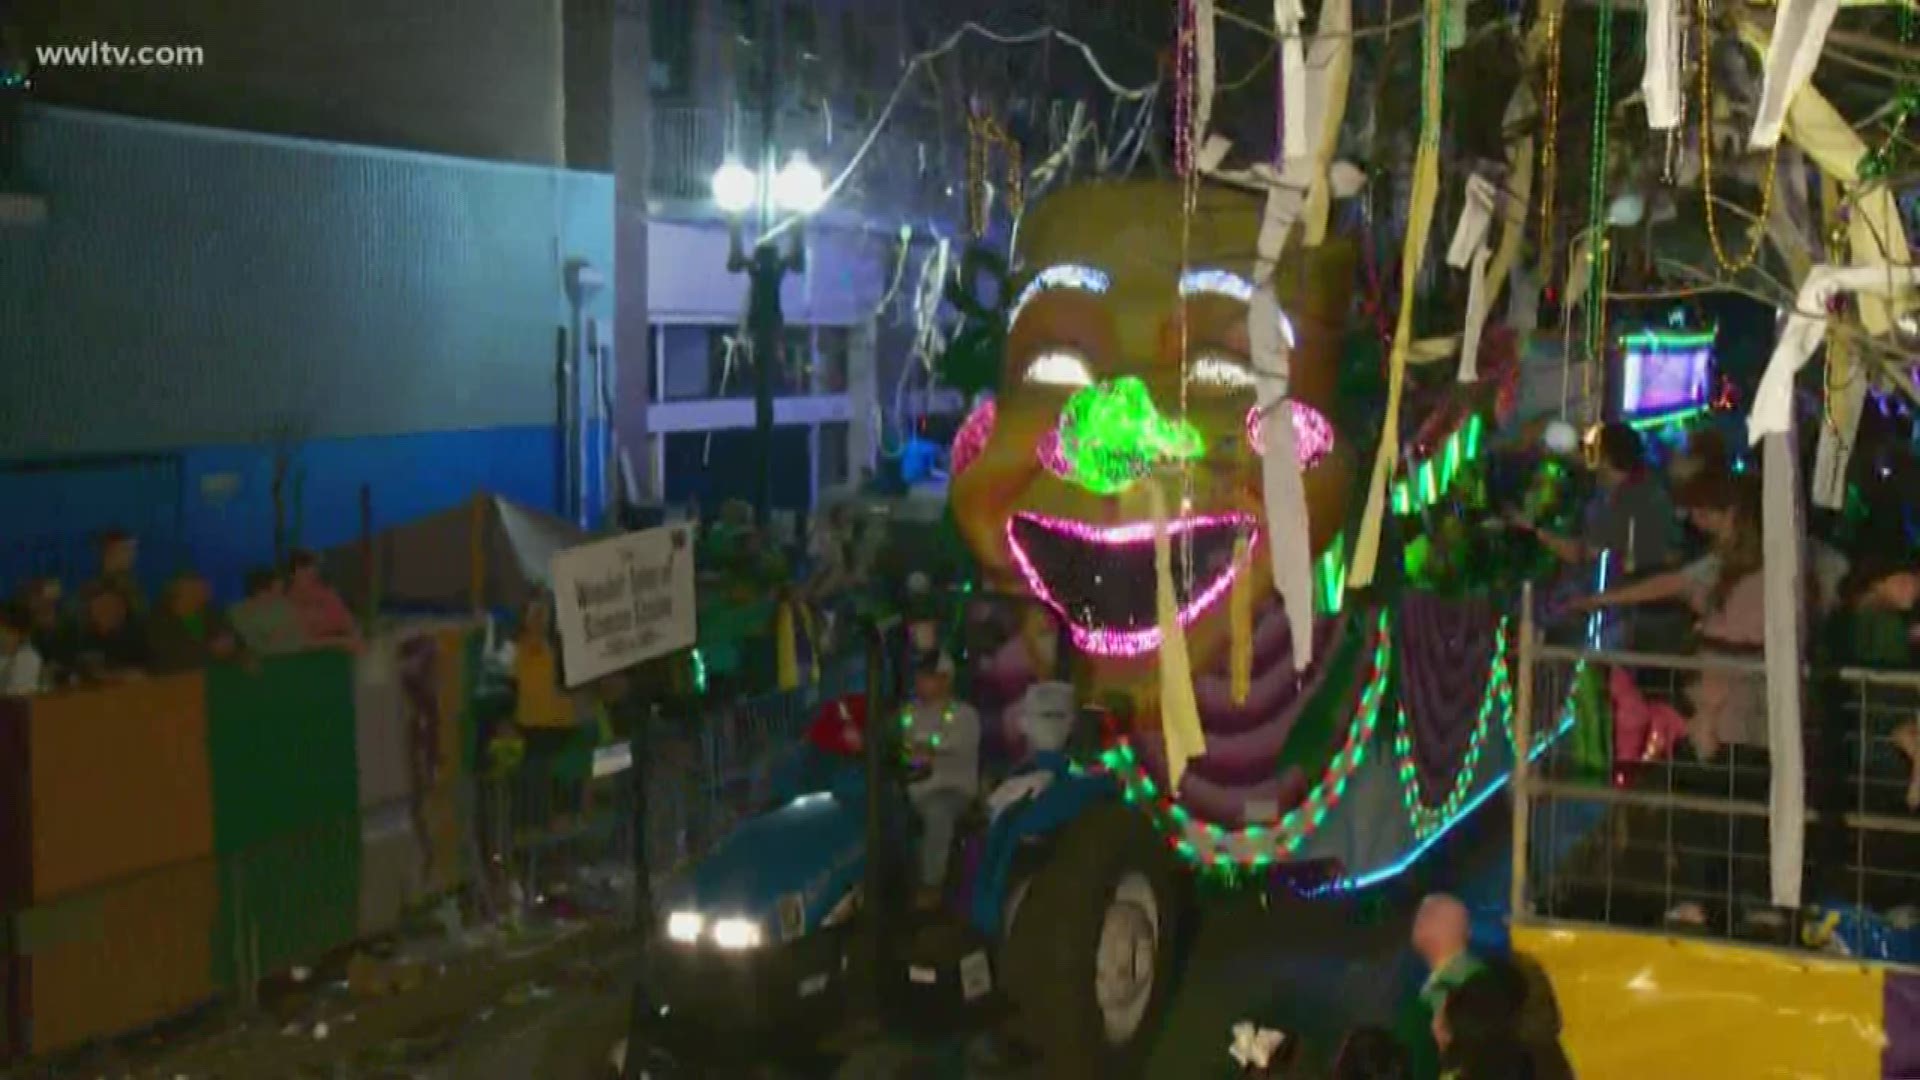 The 2020 Endymion parade will differ from its regular route and the ball will be held at a new location, Krewe leaders announced Monday.